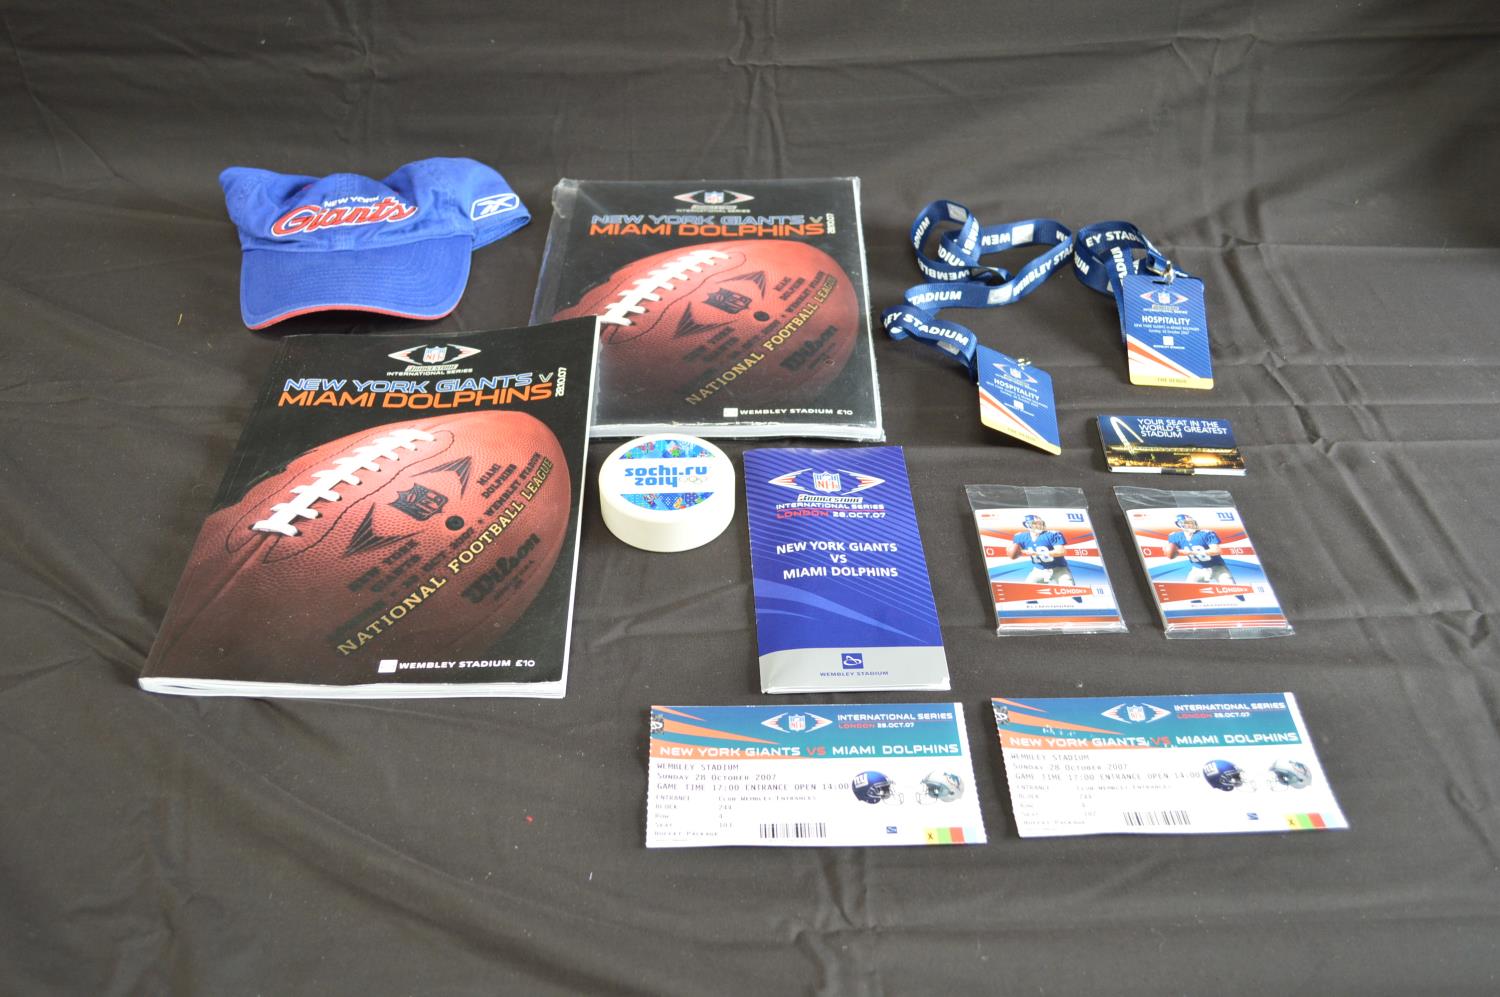 Quantity of Beijing 2008 memorabilia to include: hats, flags, tickets and other related - Image 3 of 4